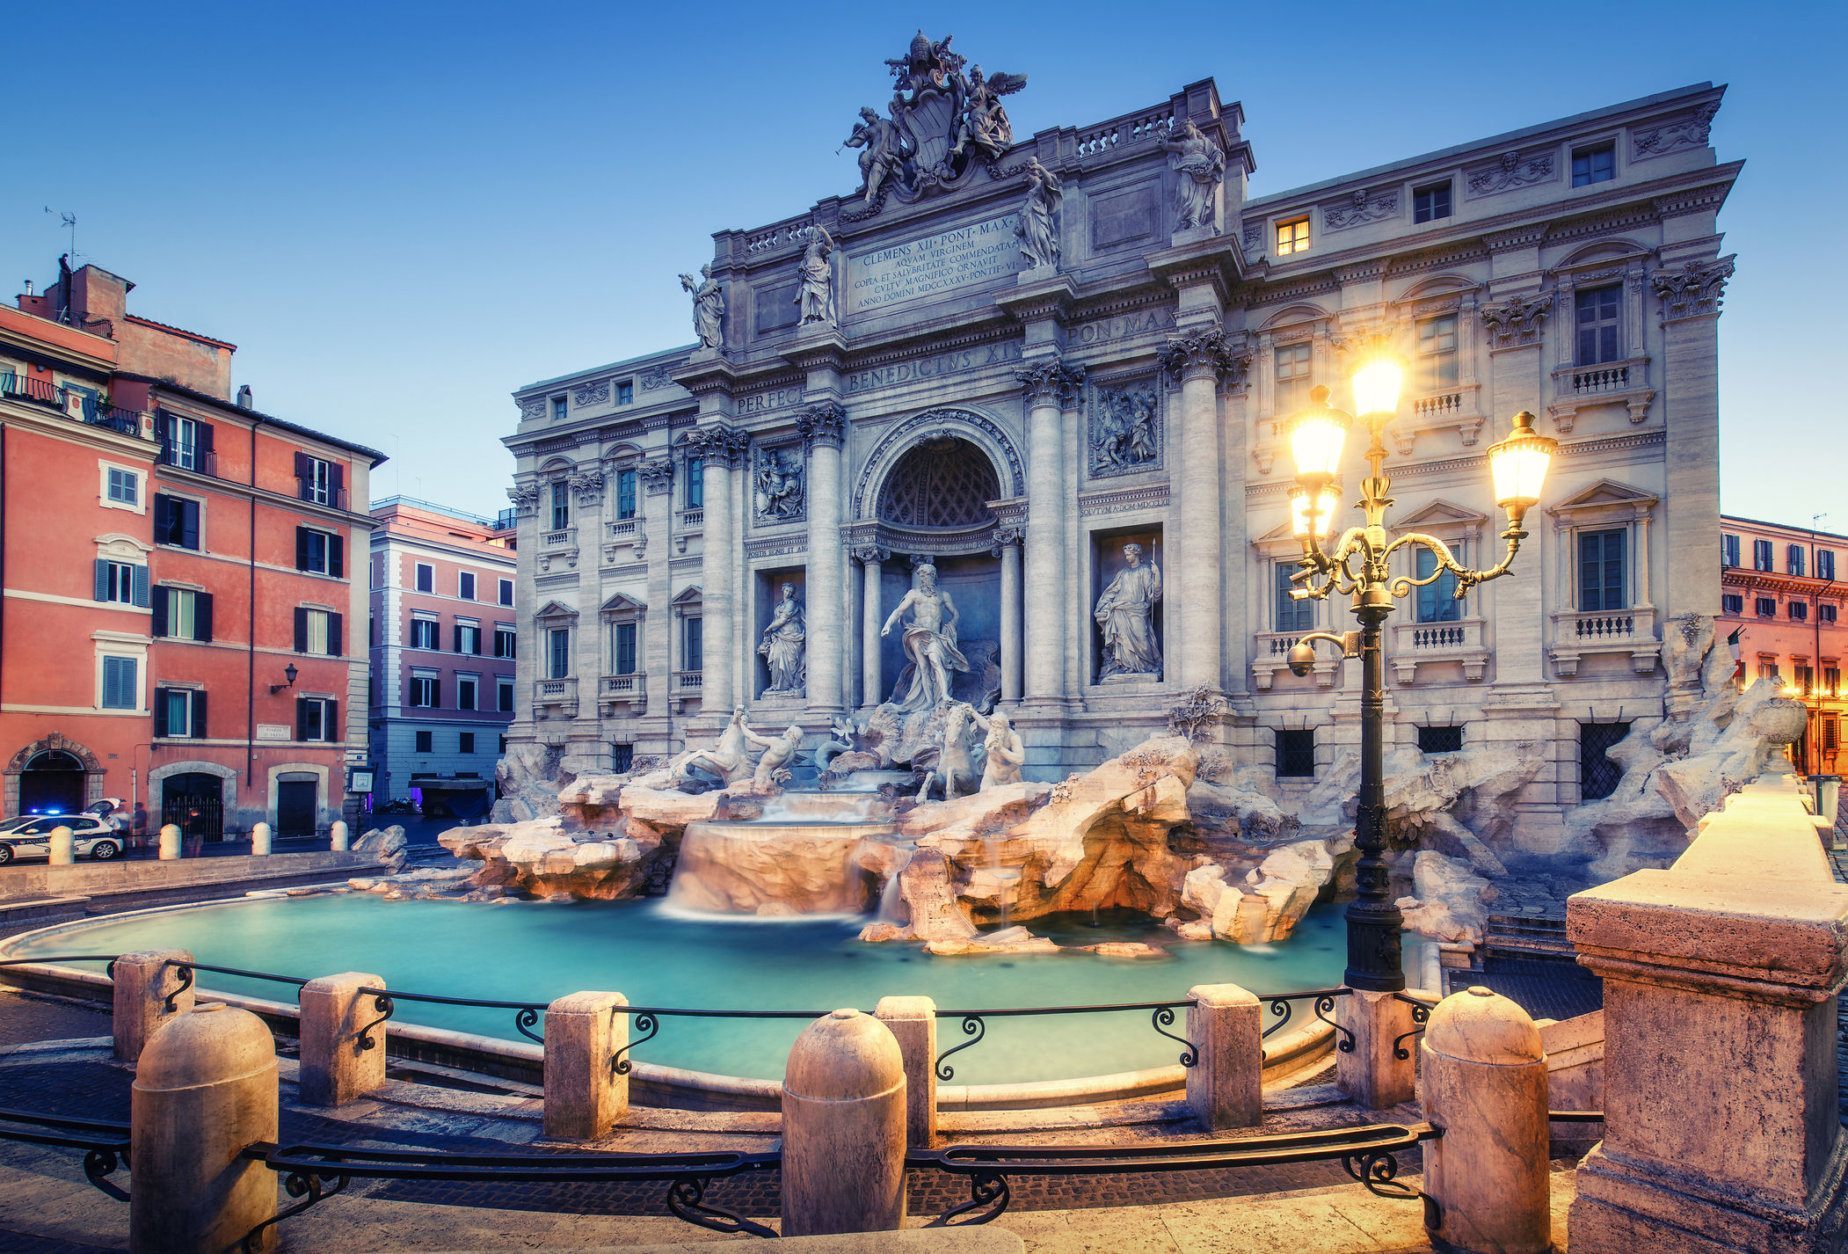 Trevi Fountain in Rome, Italy at sunrise. Scenic travel background.